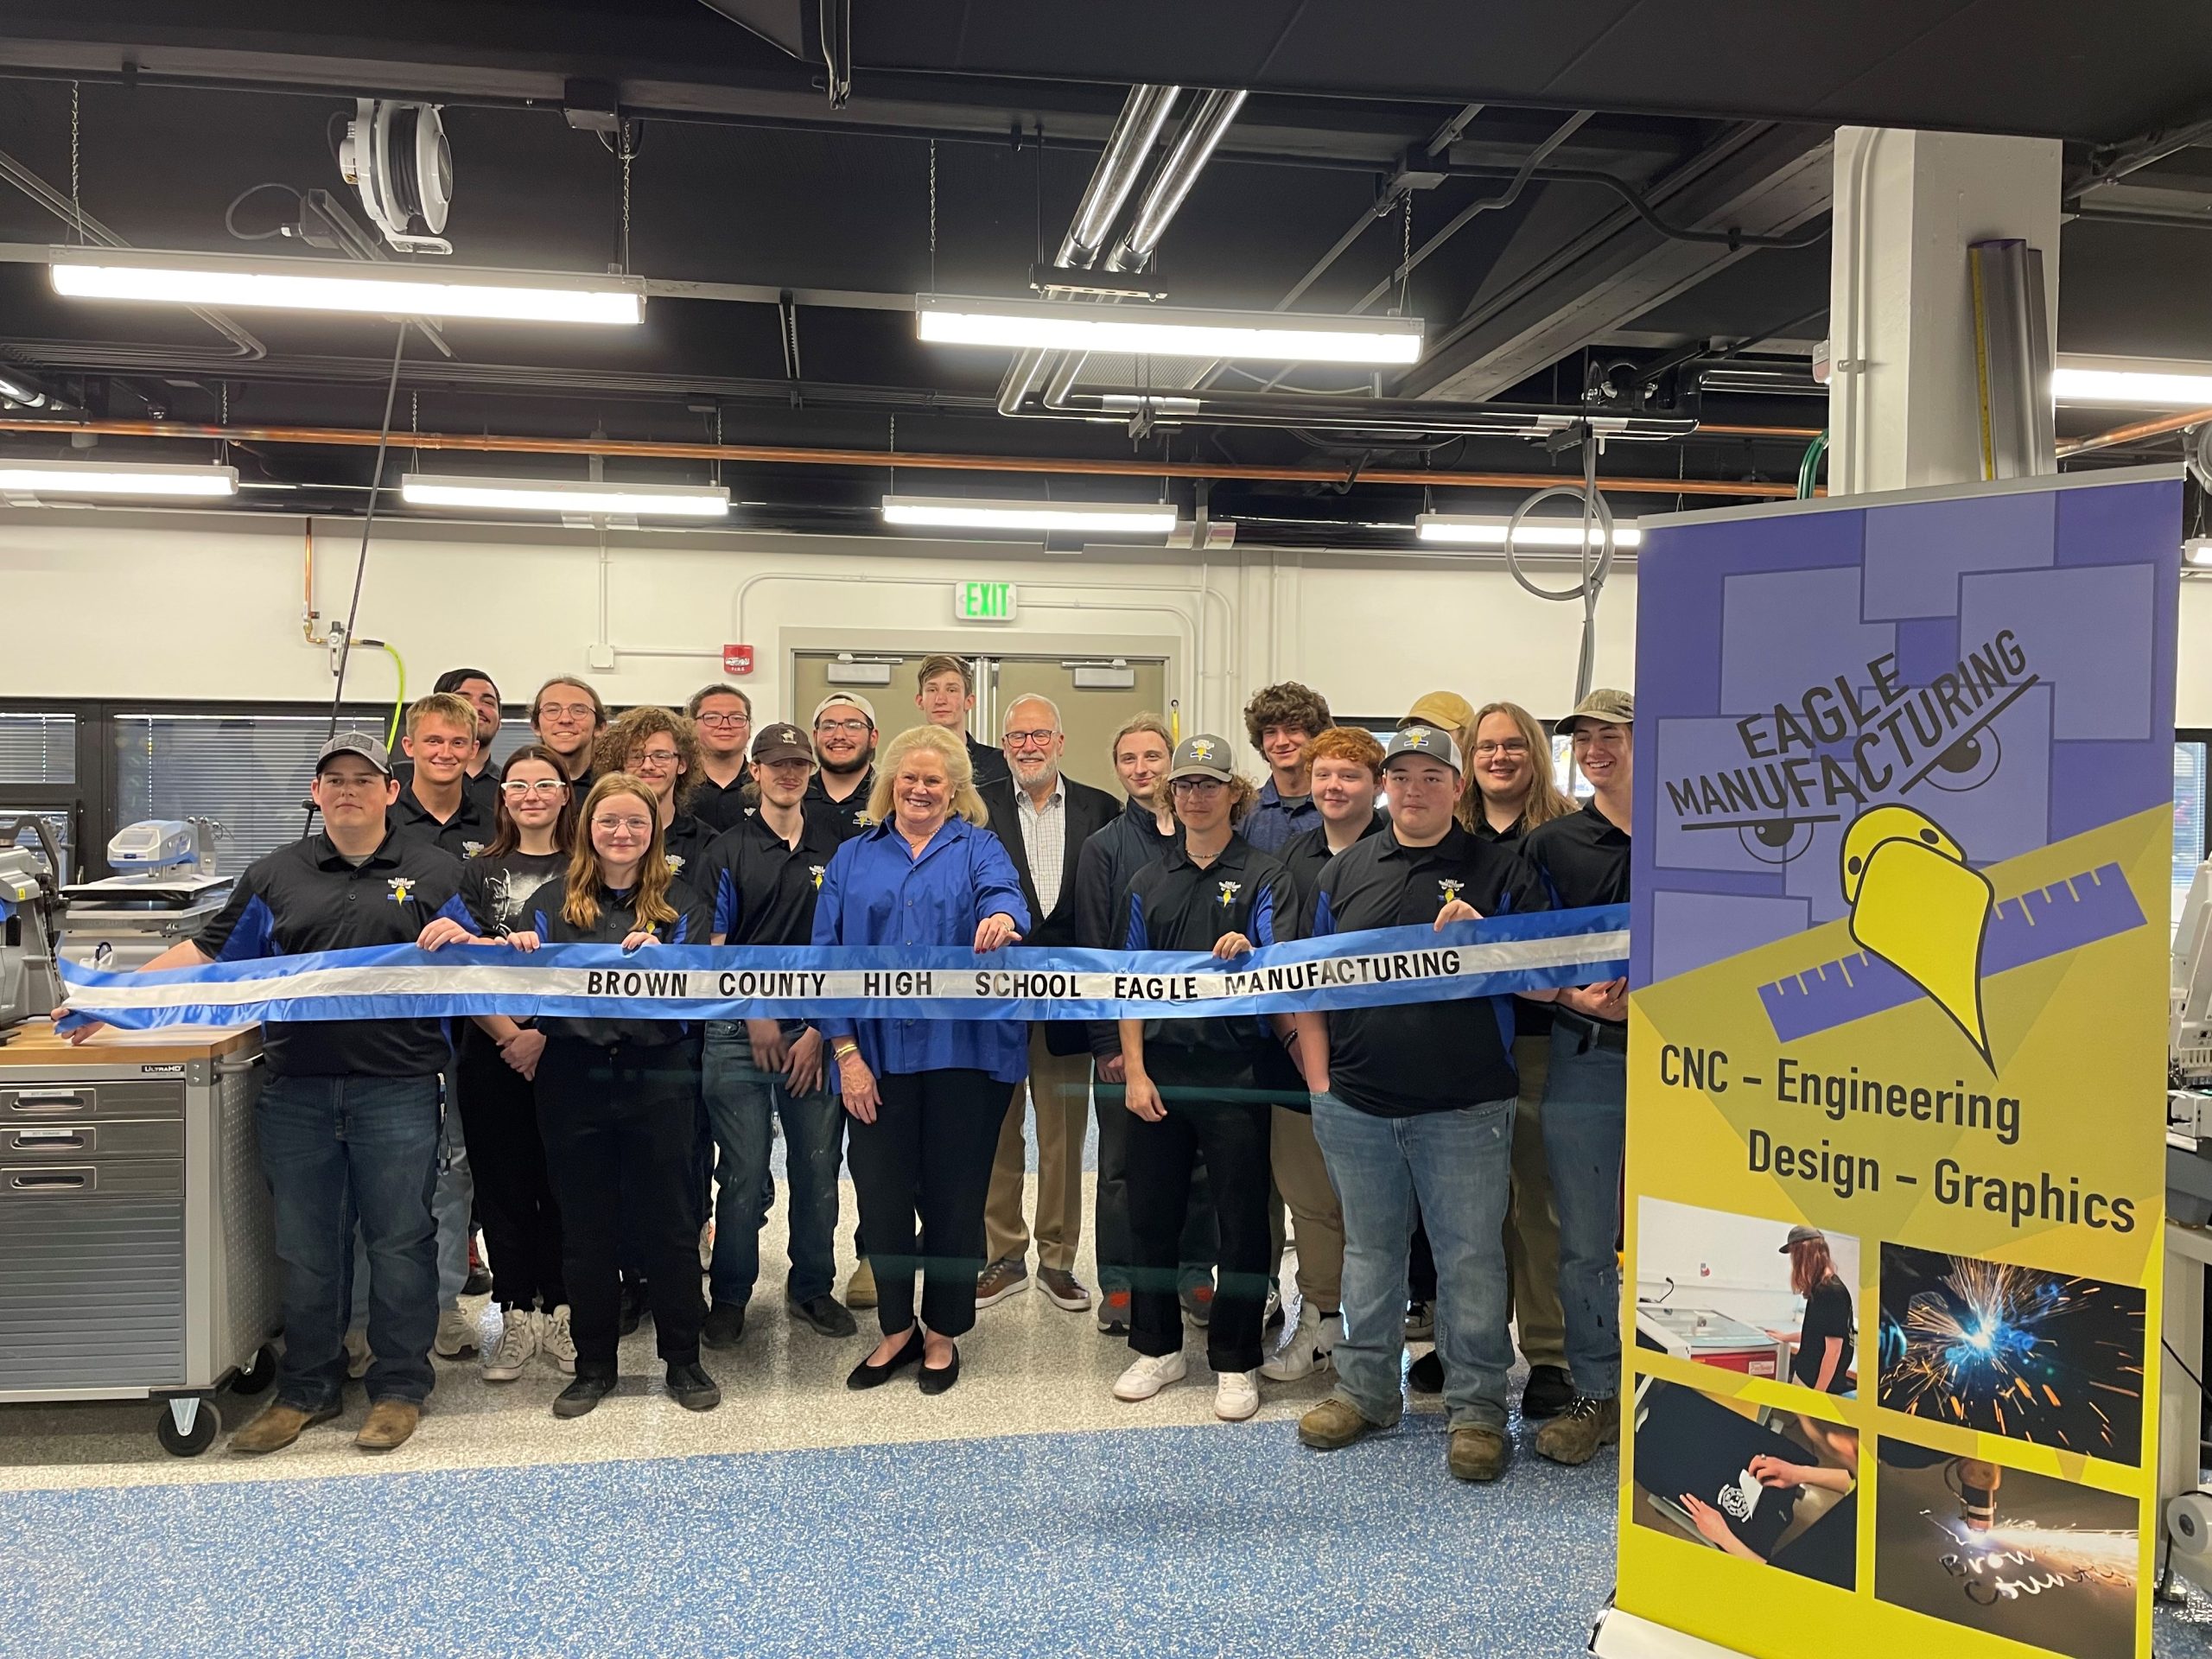 Ribbon cutting event at Brown County Schools Eagle Manufacturing